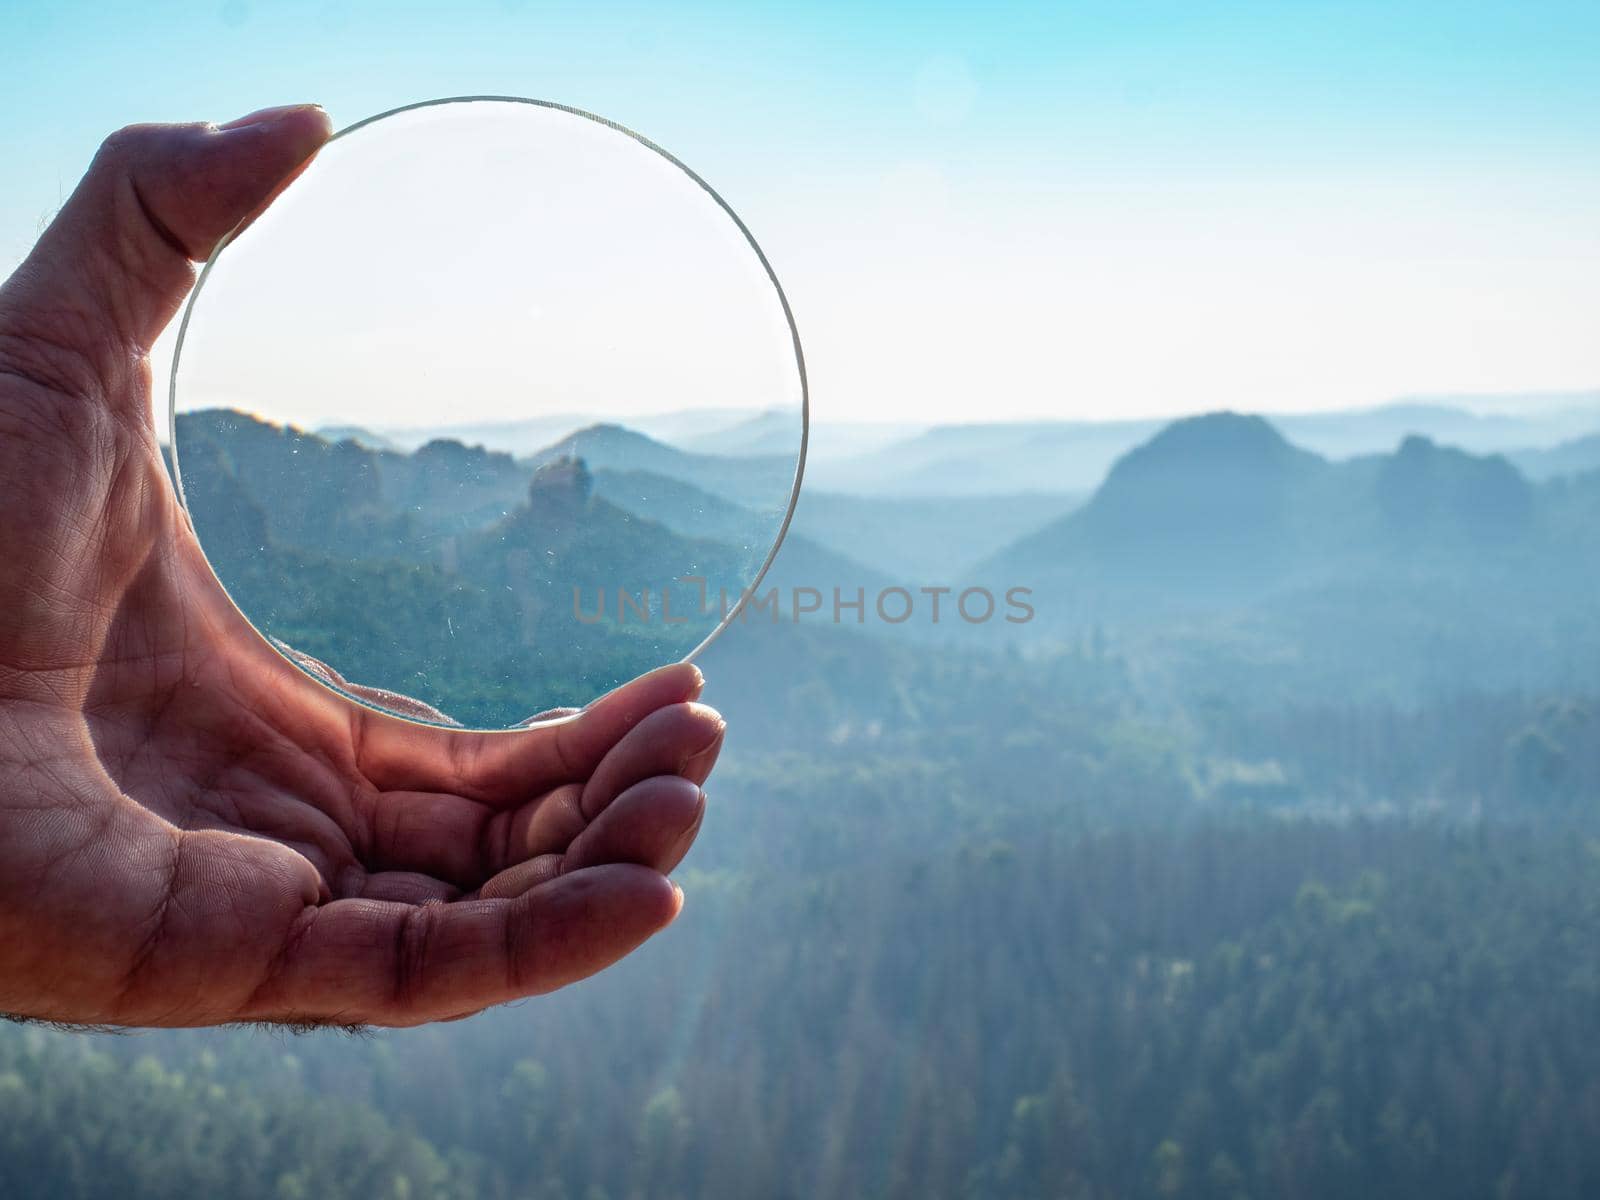 Crystal glass ball in a man's hand. The morning misty hilly landscape is reflected in the lens.